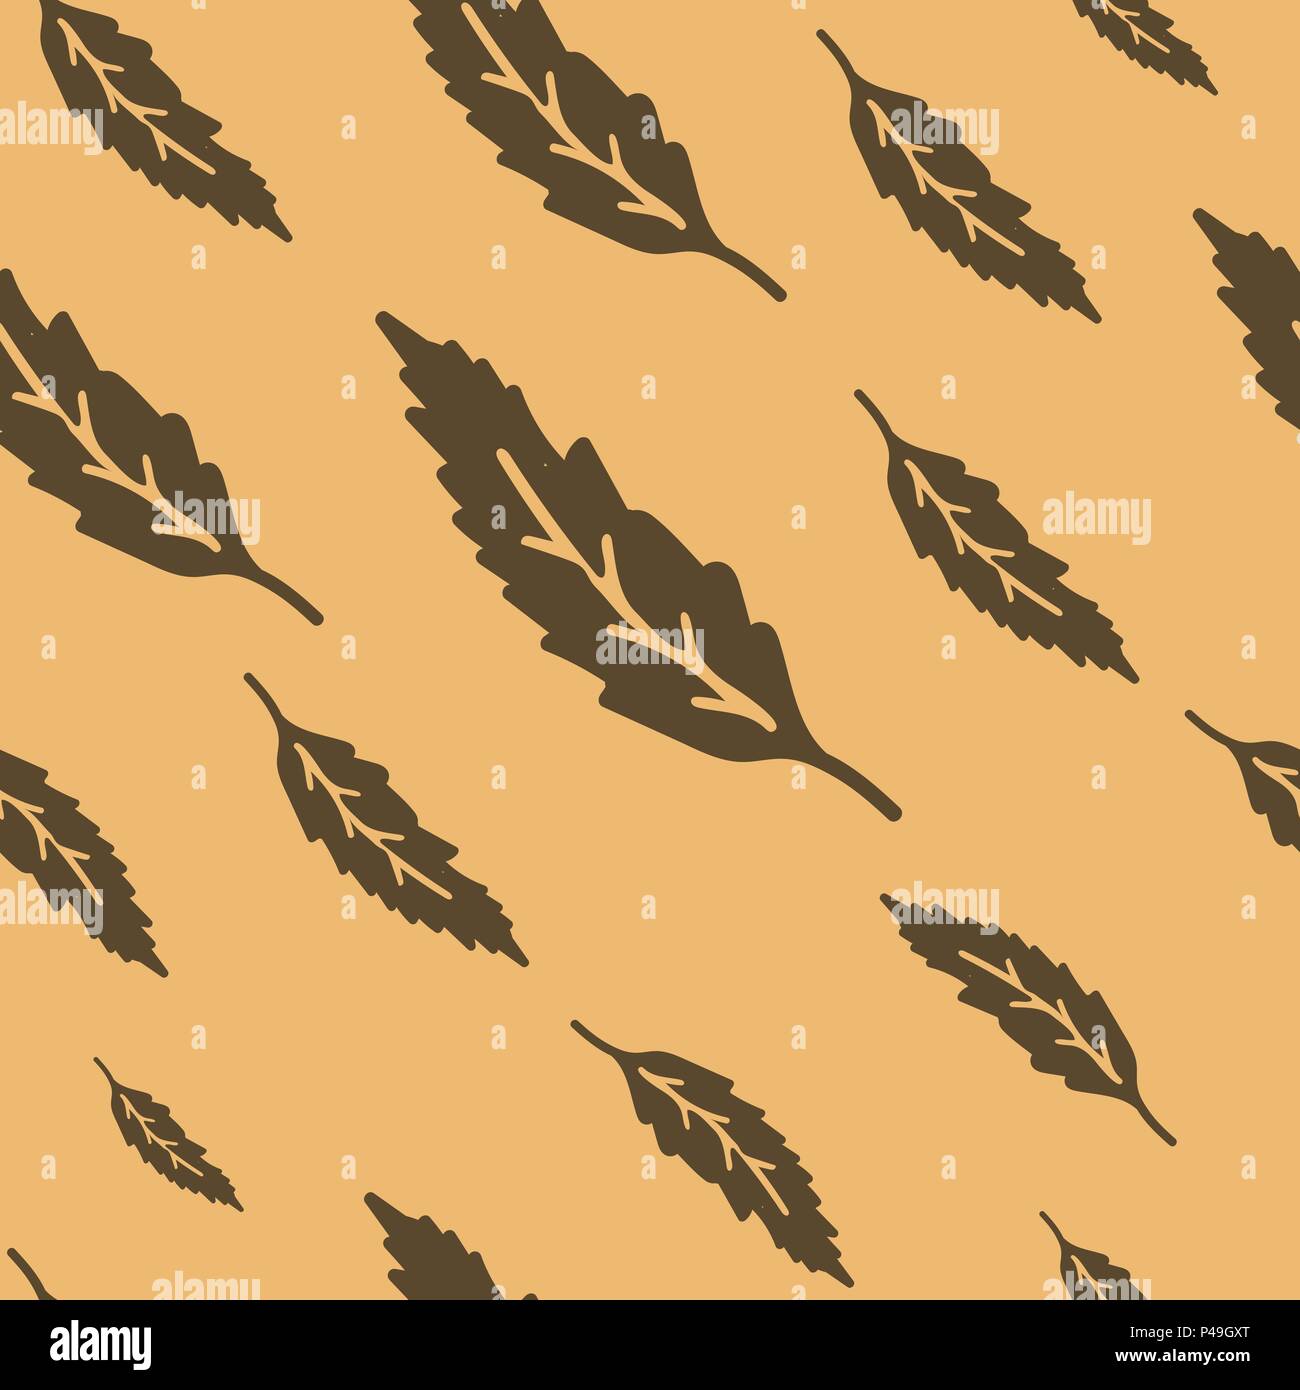 Vector illustration of brown leaves seamless pattern. Flat beige background. Modern mood and colors Stock Vector